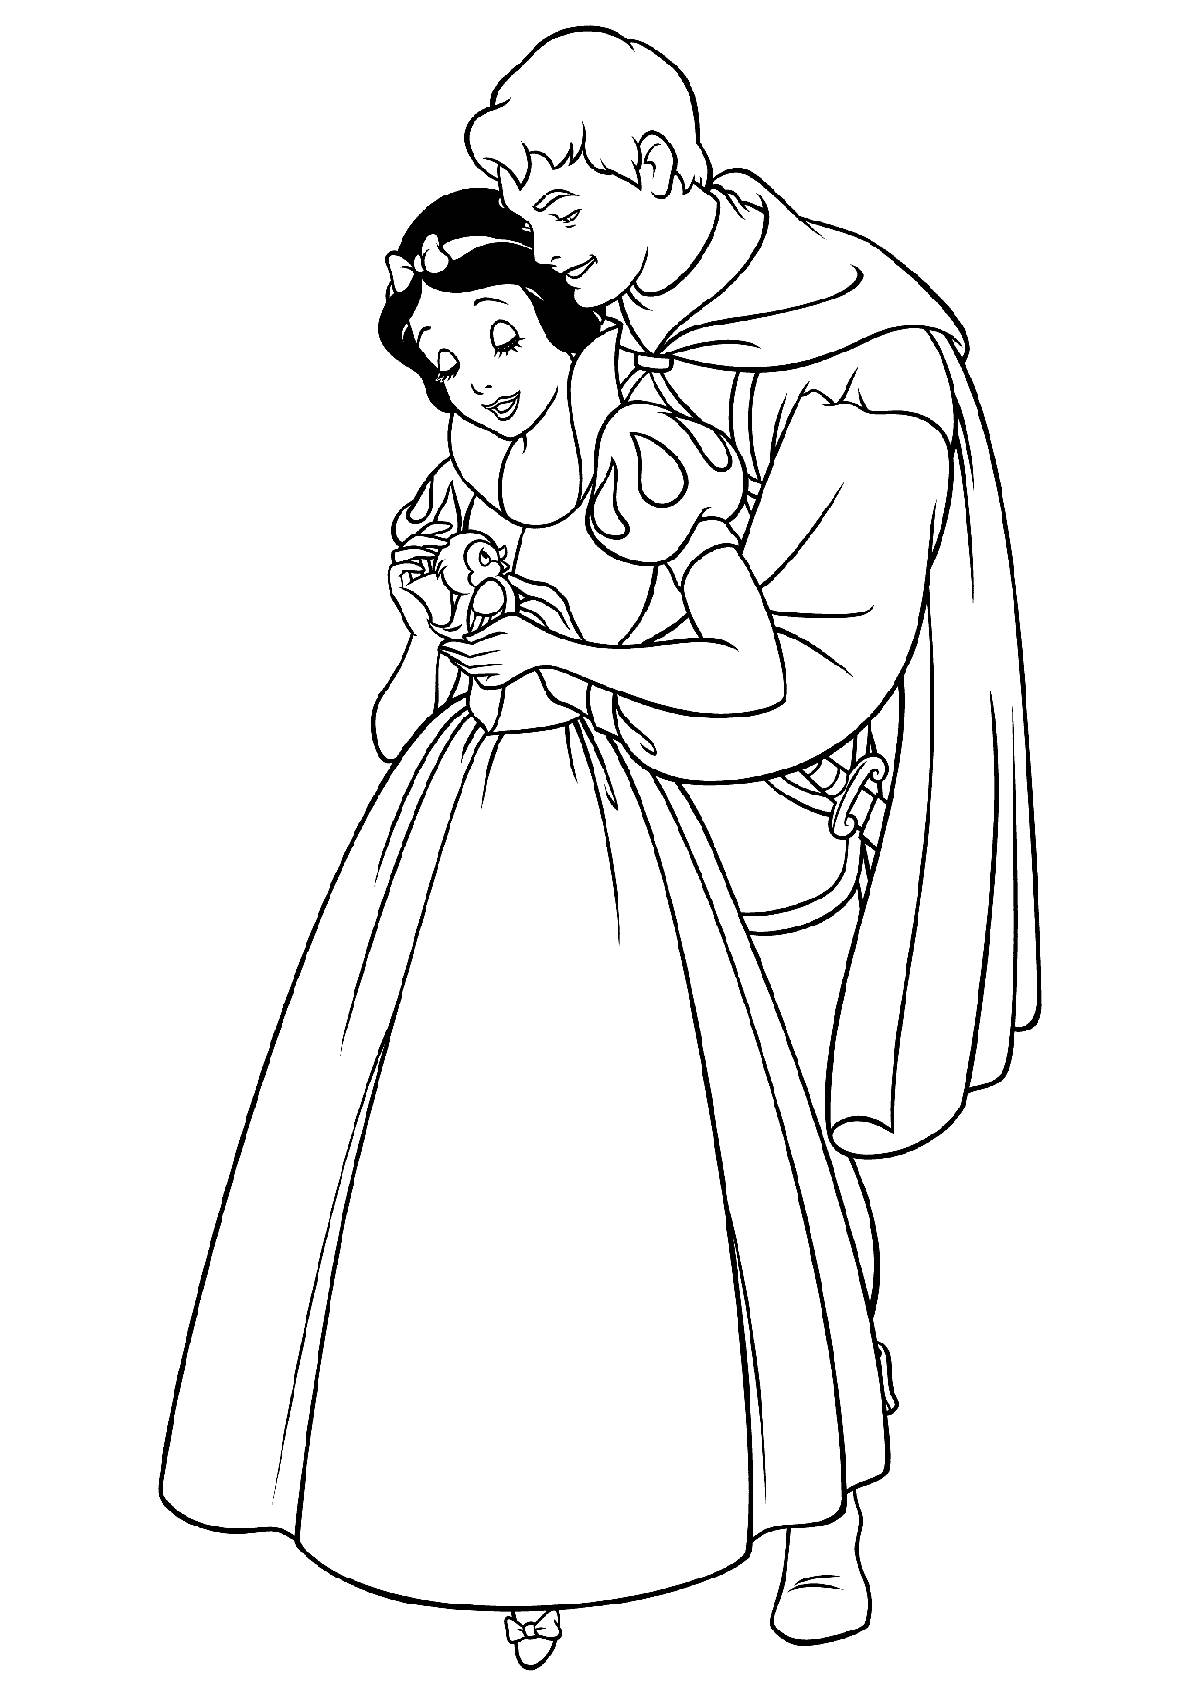 Snow white and prince